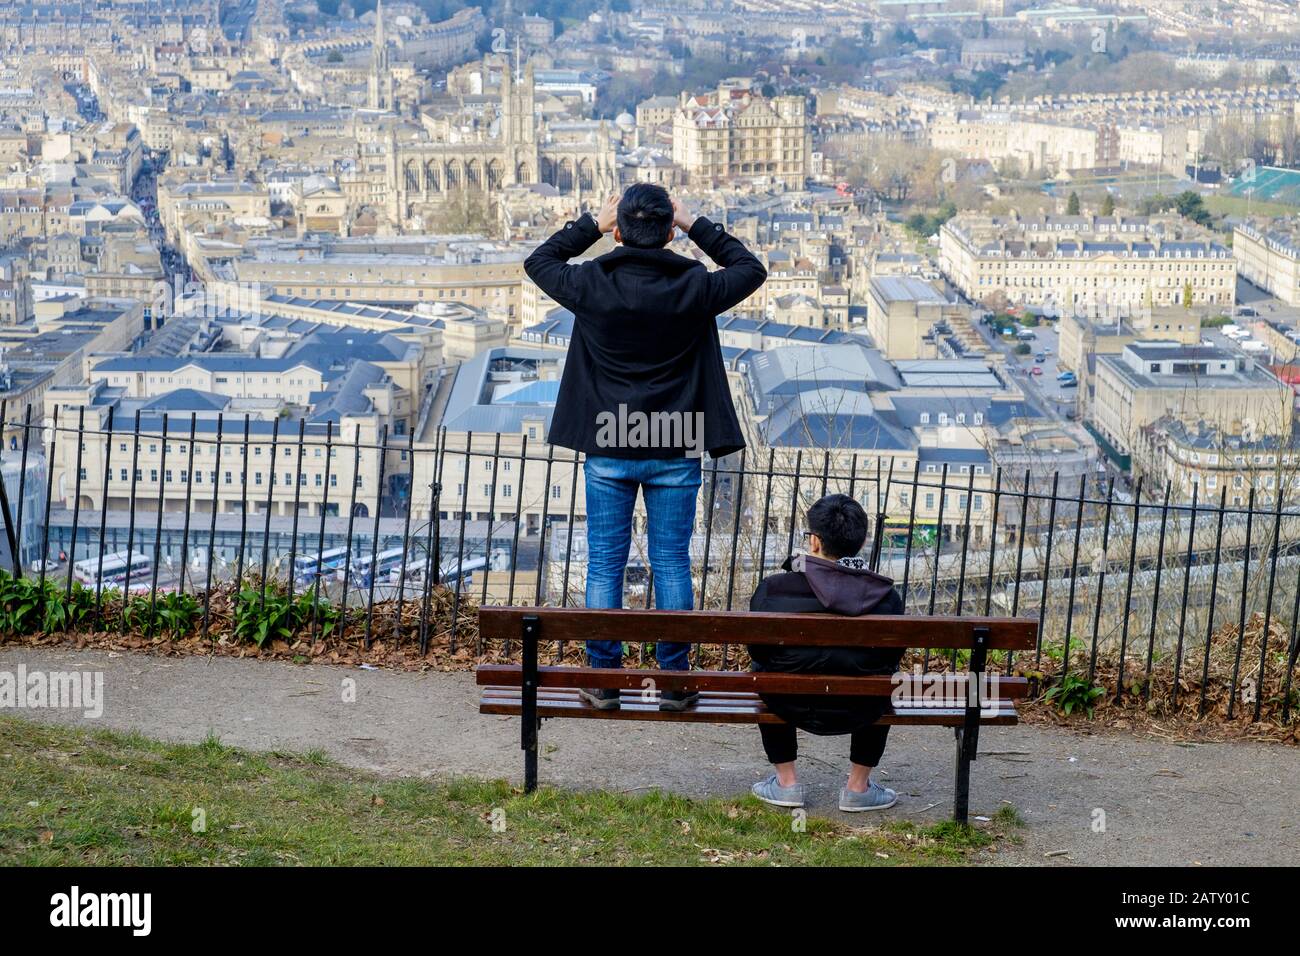 People taking advantage of the high vantage point view are pictured in Alexandra Park looking down at the city of Bath. Bath Somerset England uk Stock Photo